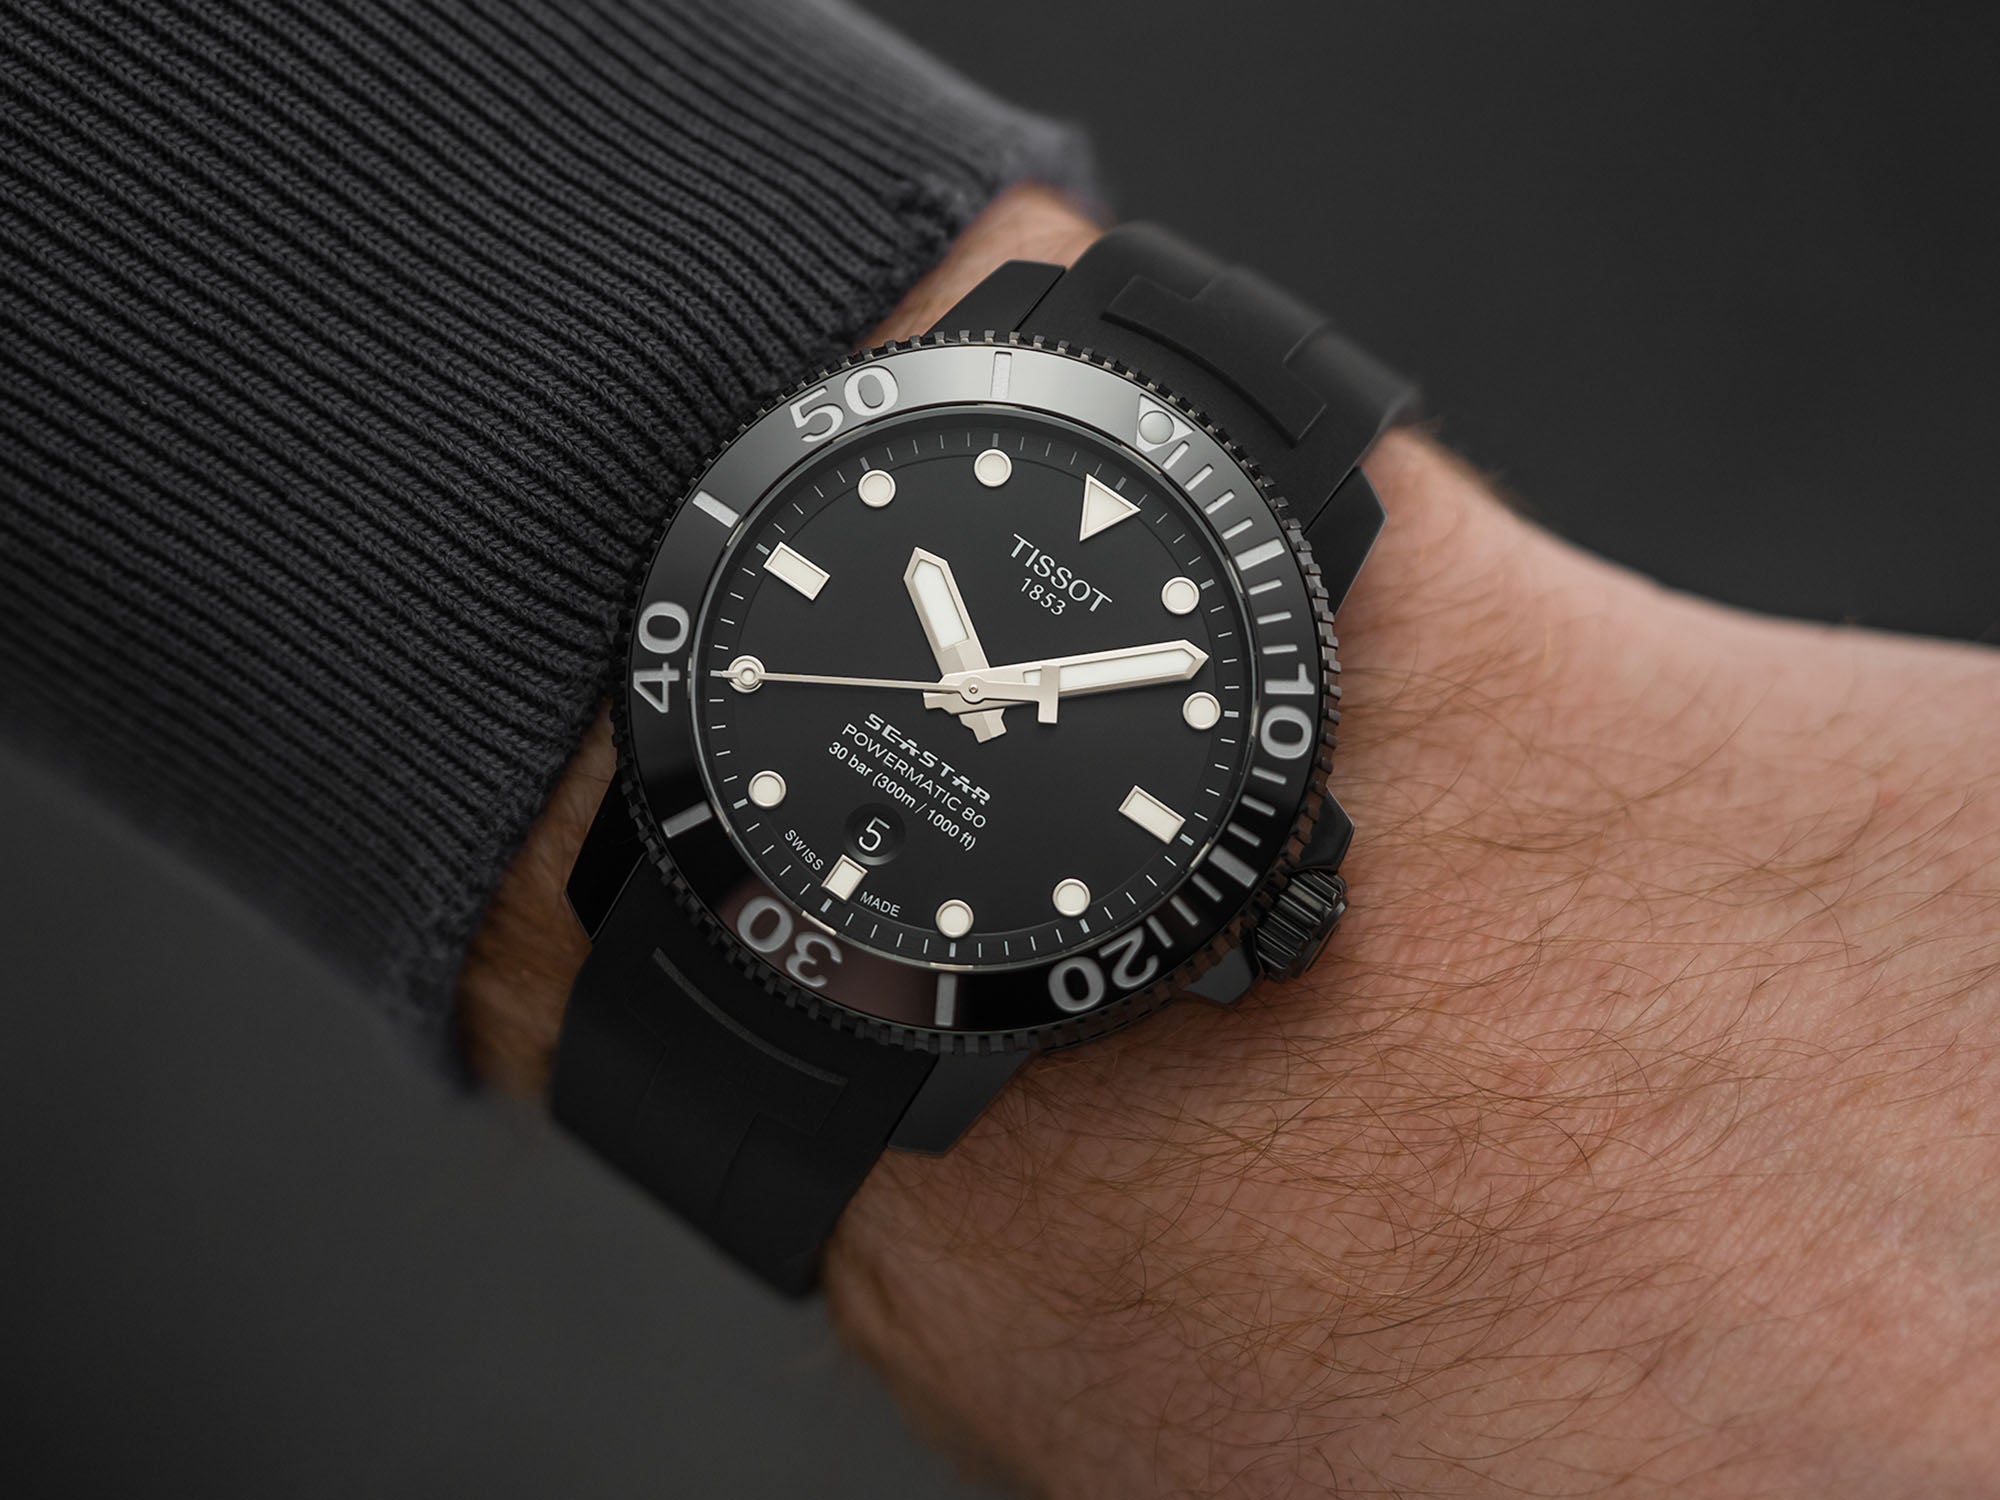 Time+Tide's The Black List: The best black watches in recent memory